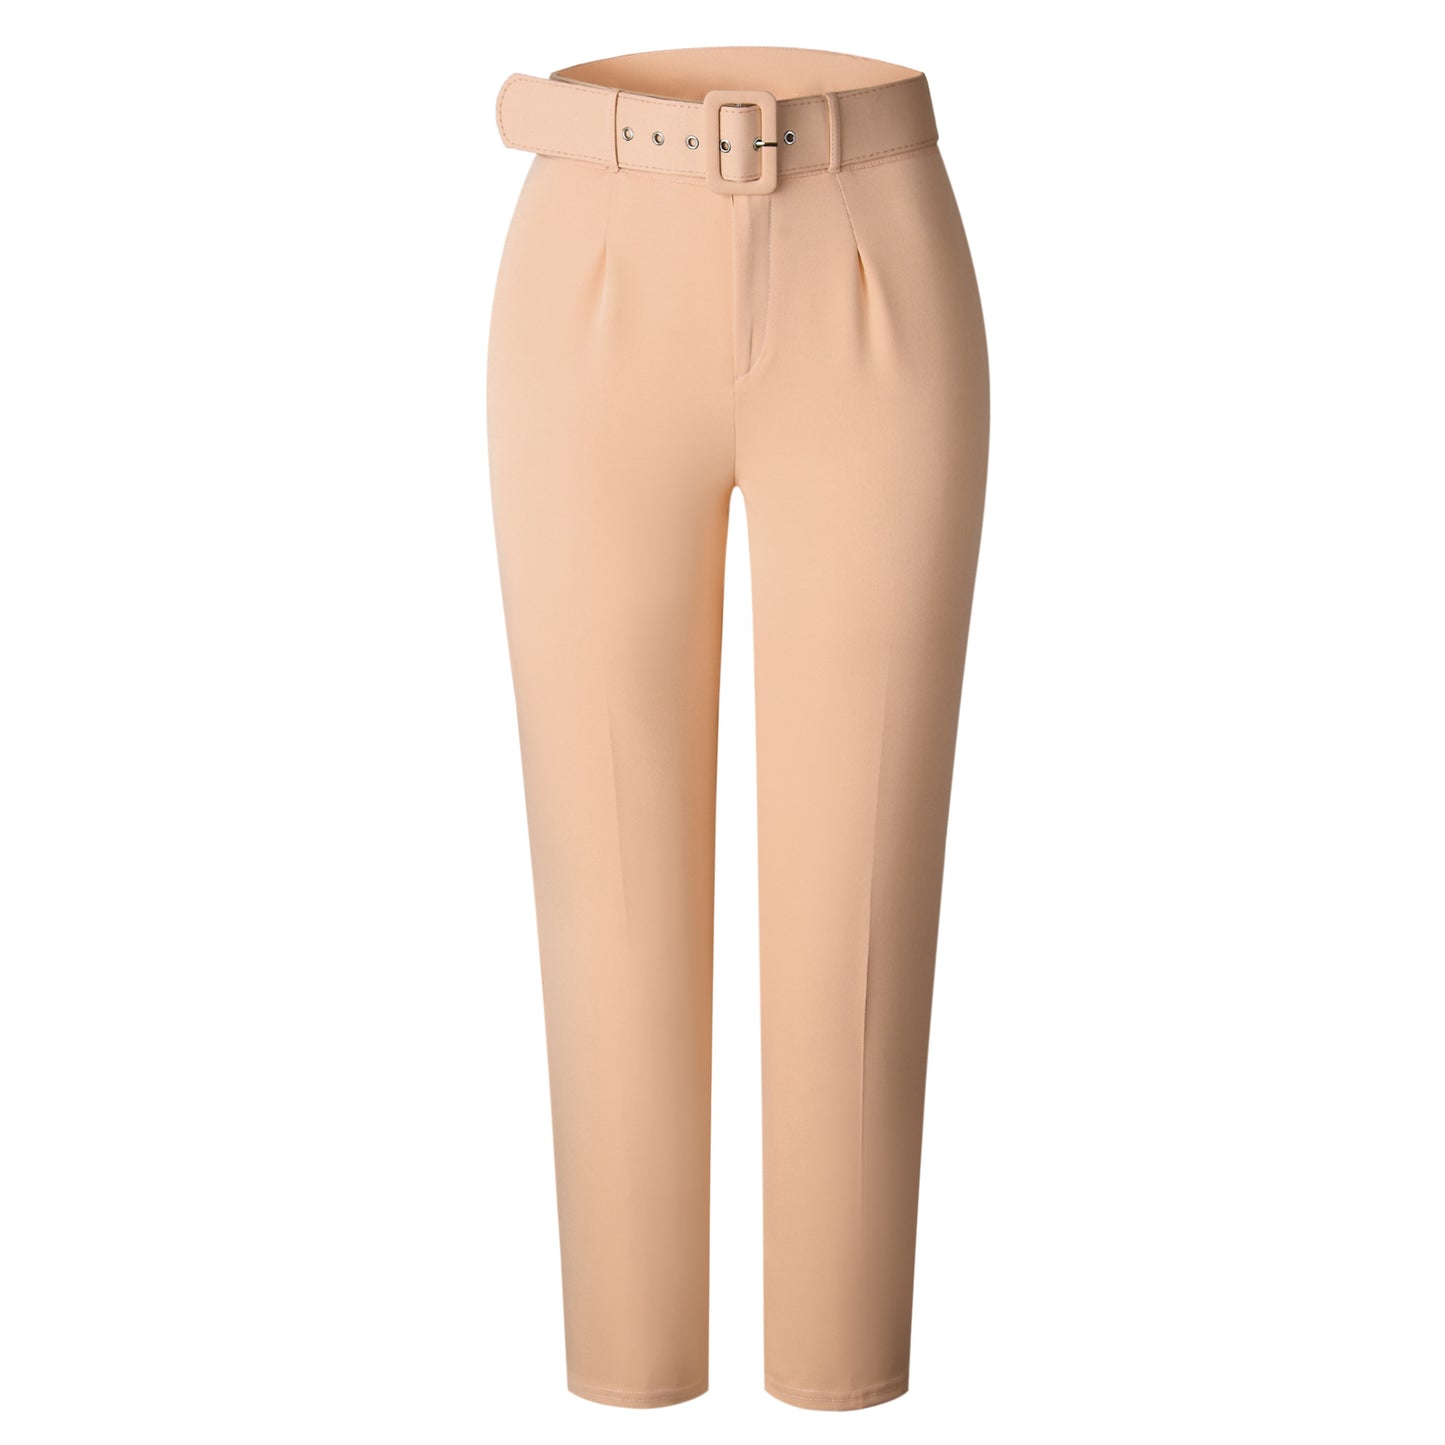 BamBam Women's Spring And Summer High Waist Casual Pants Slim Fit Set Career Women's Trousers Autumn Professional Pants - BamBam